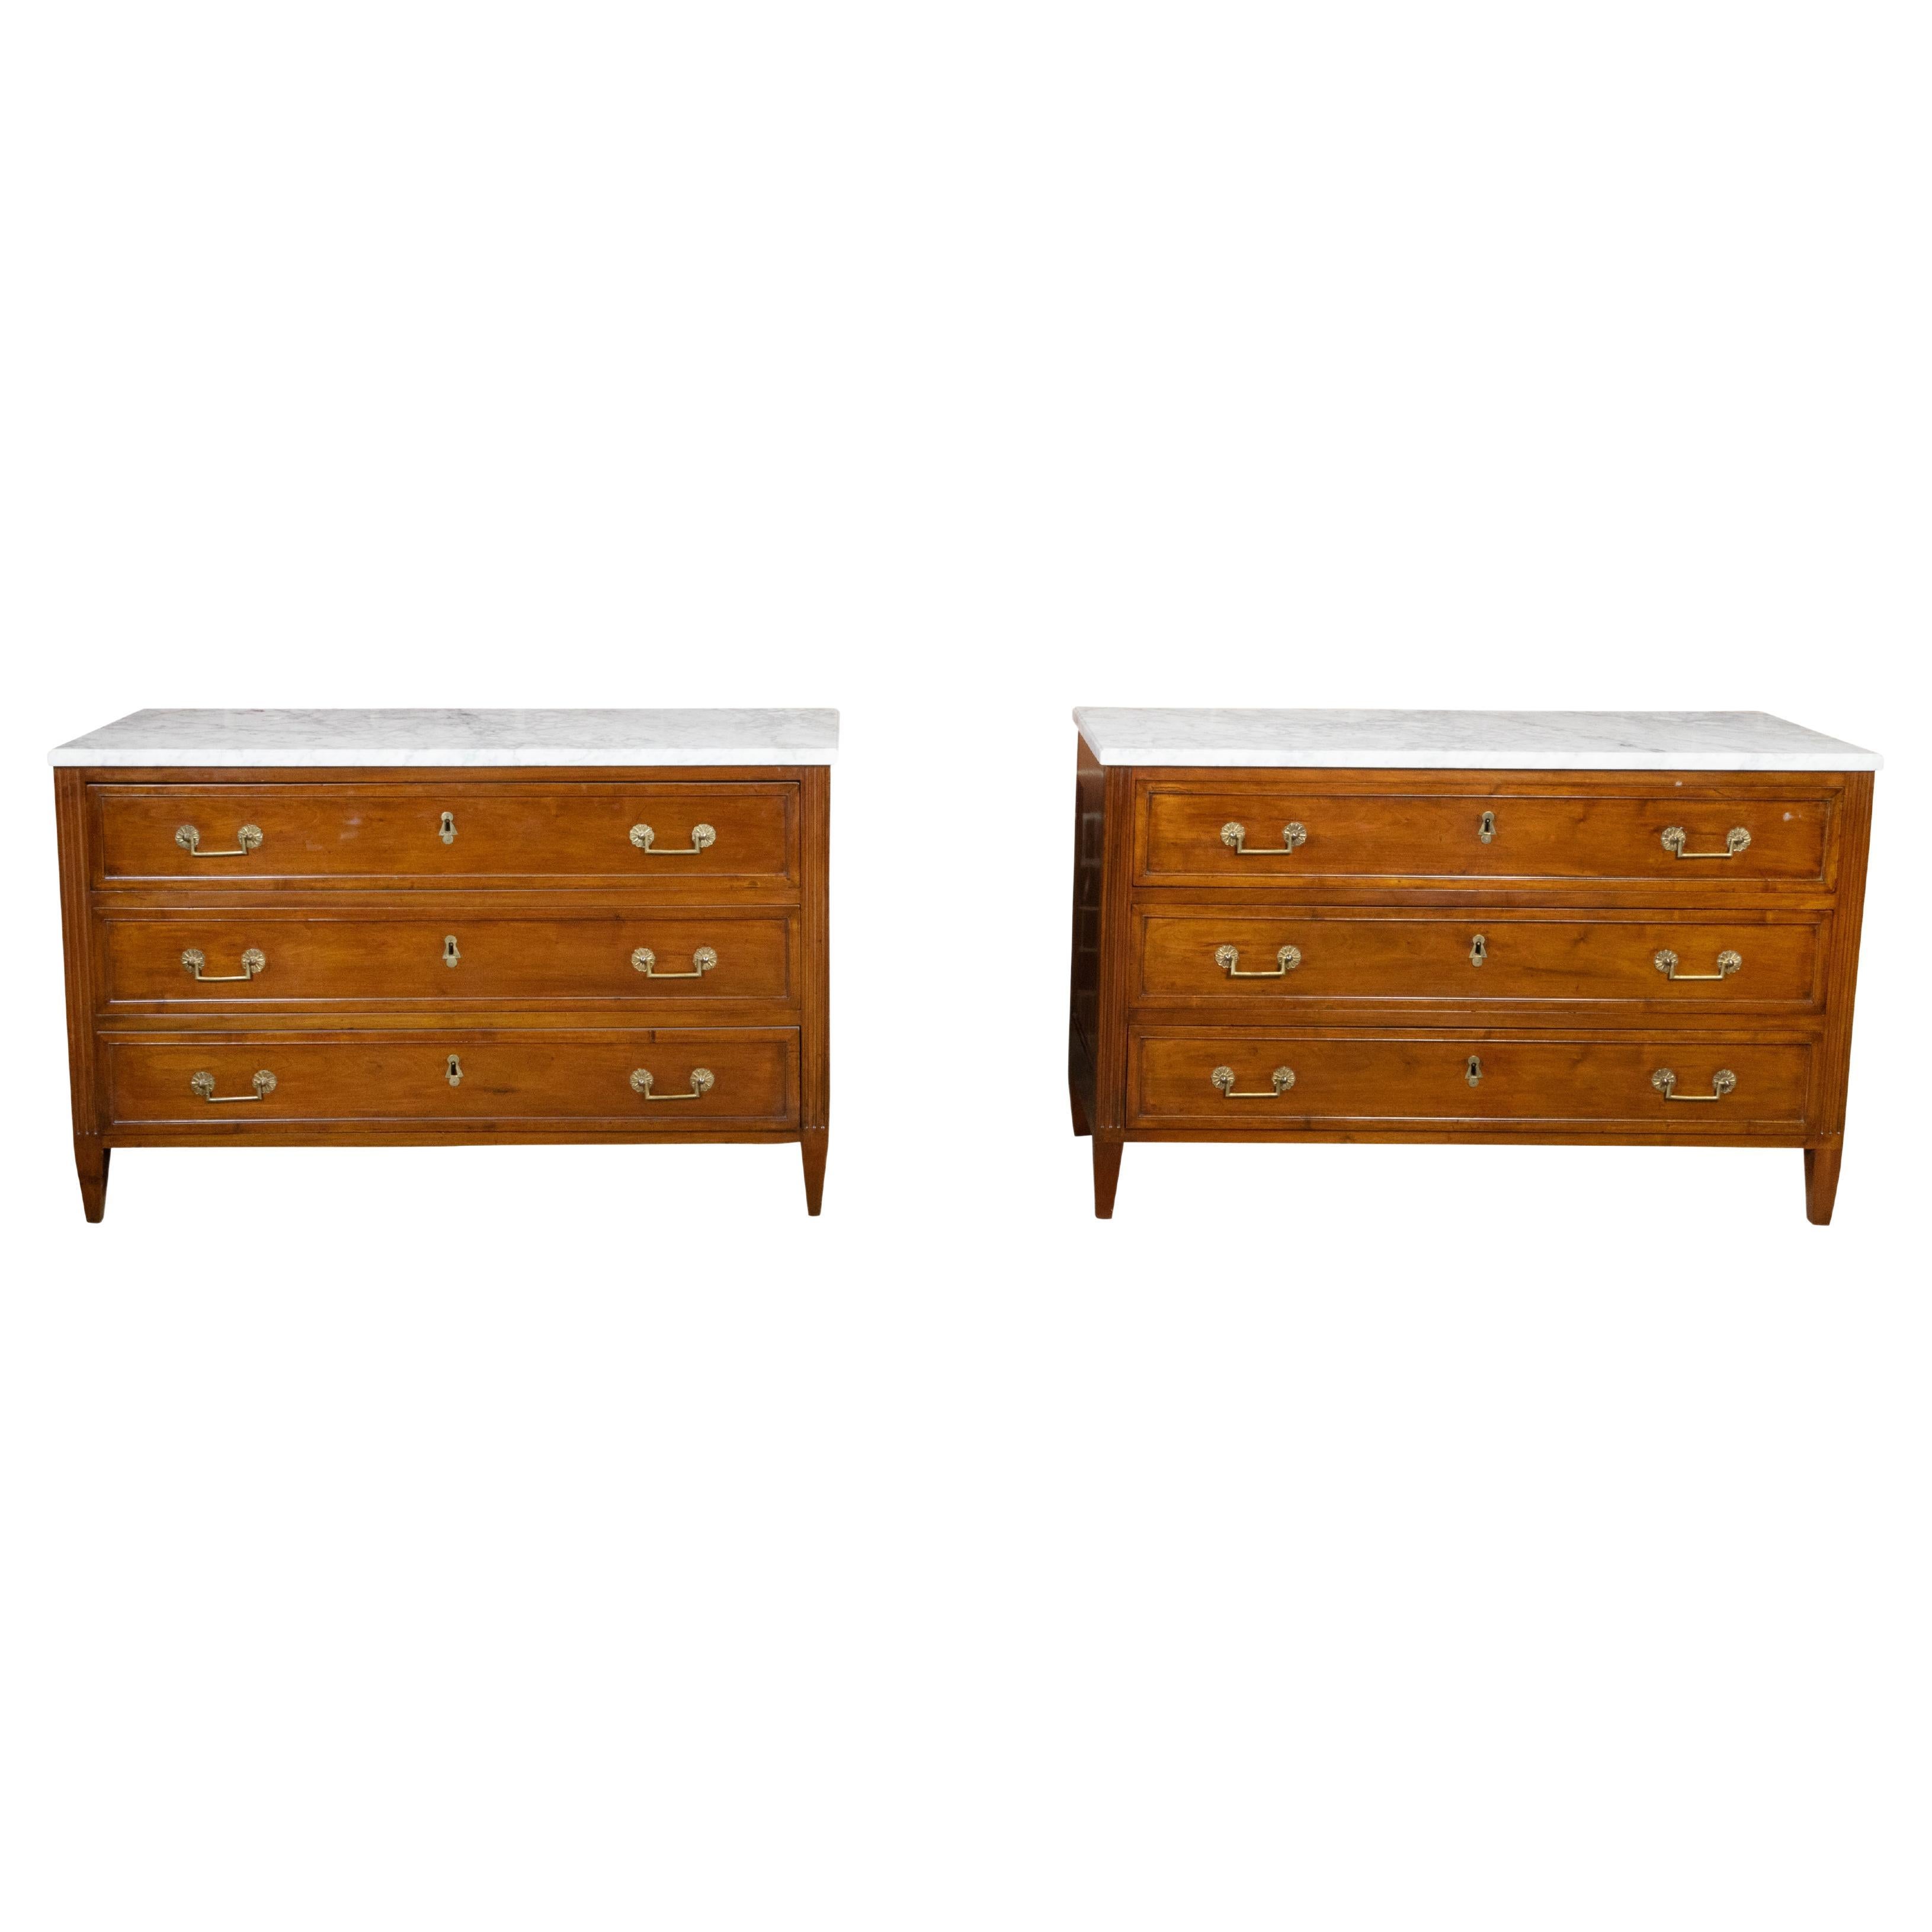 Pair of French 19th Century Three-Drawer Walnut Commodes with White Marble Tops For Sale